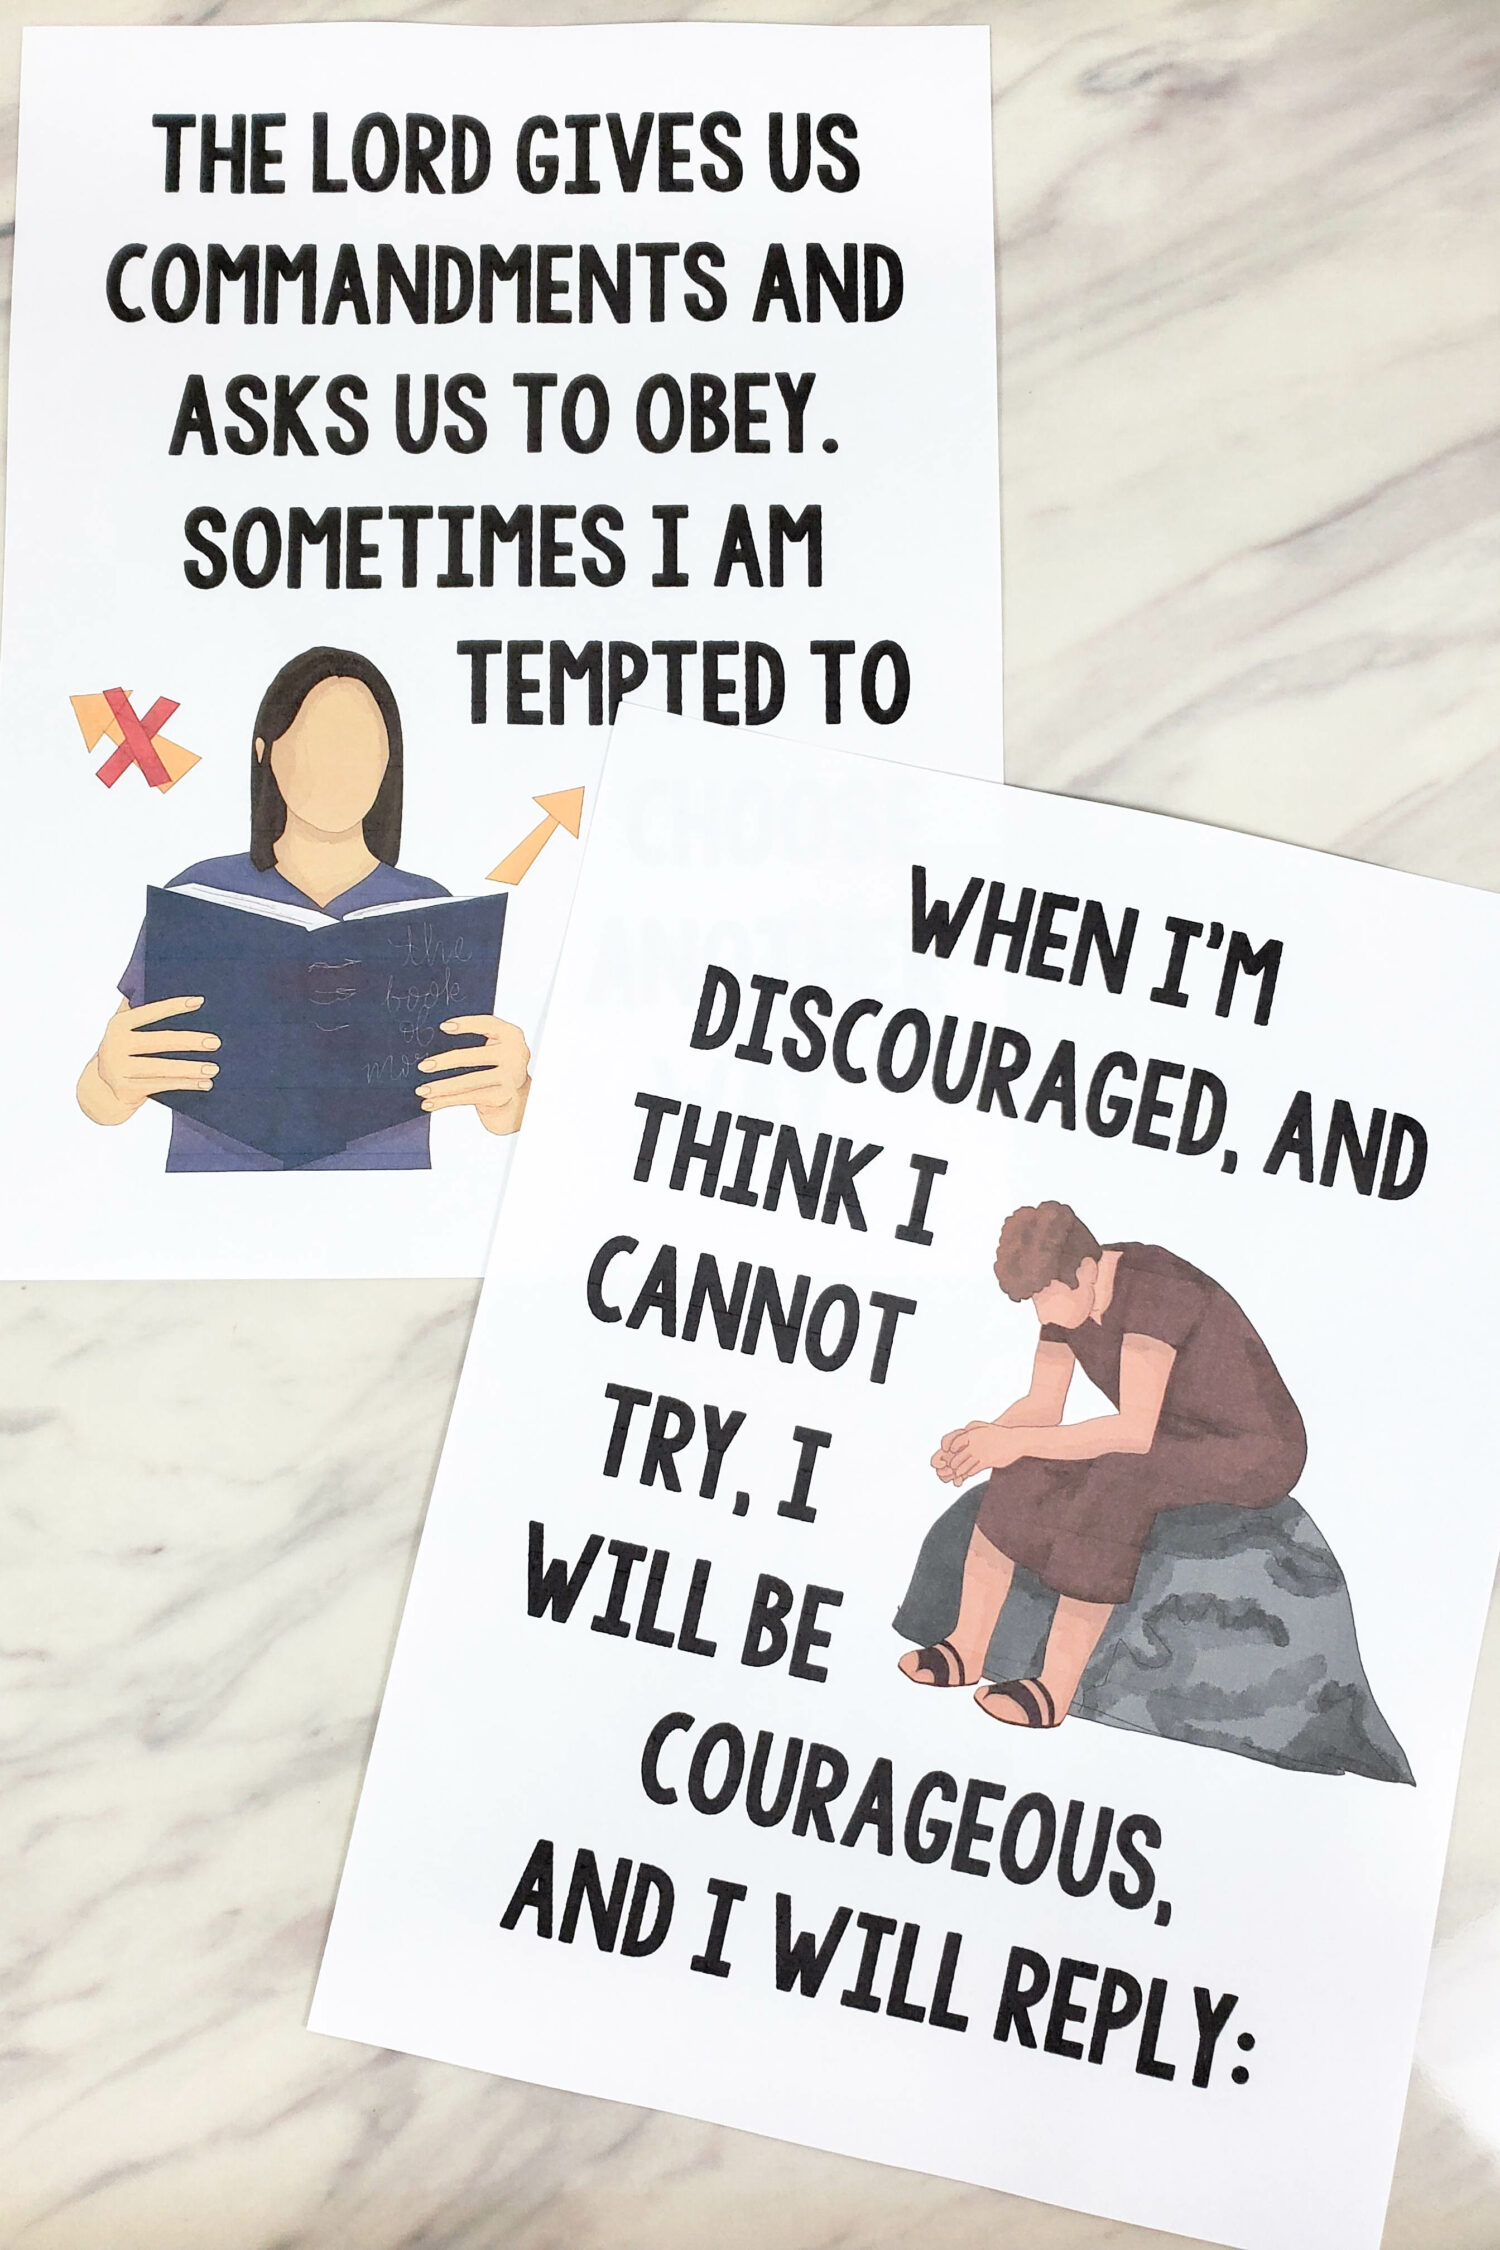 Nephi's Courage Flip Chart Teach this upbeat Primary song as part of your Book of Mormon Come Follow Me year. Printable resource for LDS Primary Music leaders or Christian song helps.